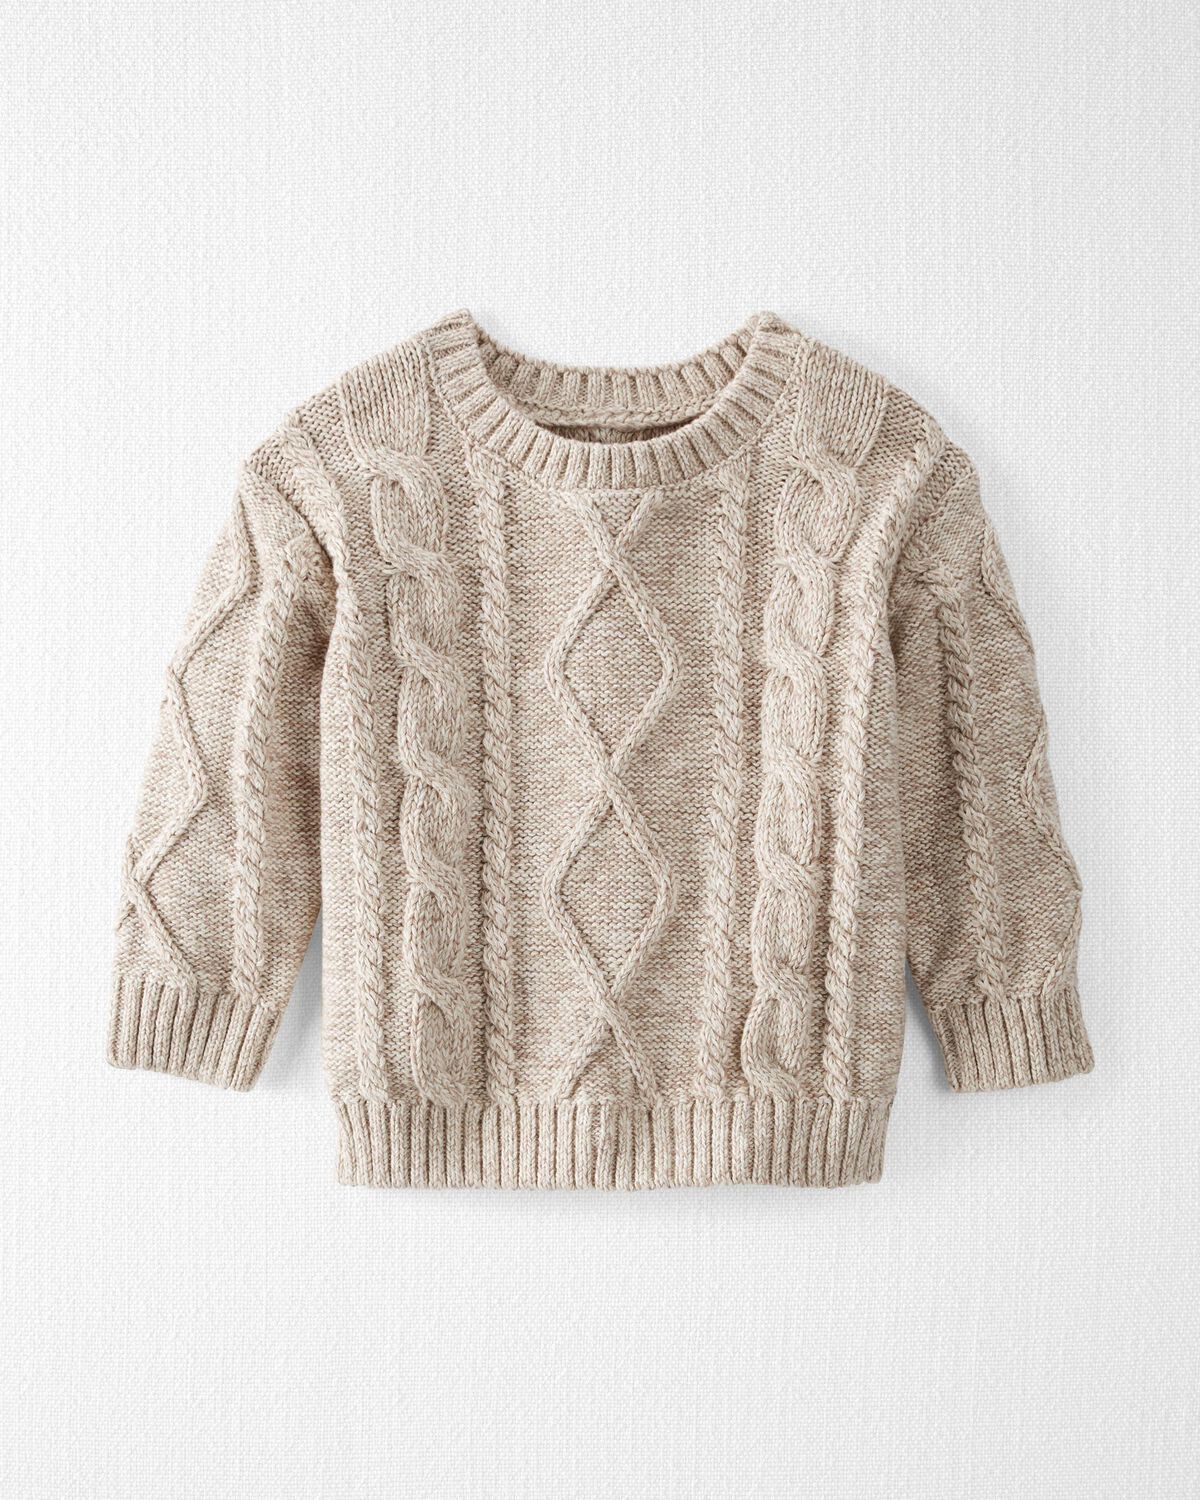 Toasted Wheat Baby Organic Cotton Cable Knit Sweater in Cream | carters.com | Carter's